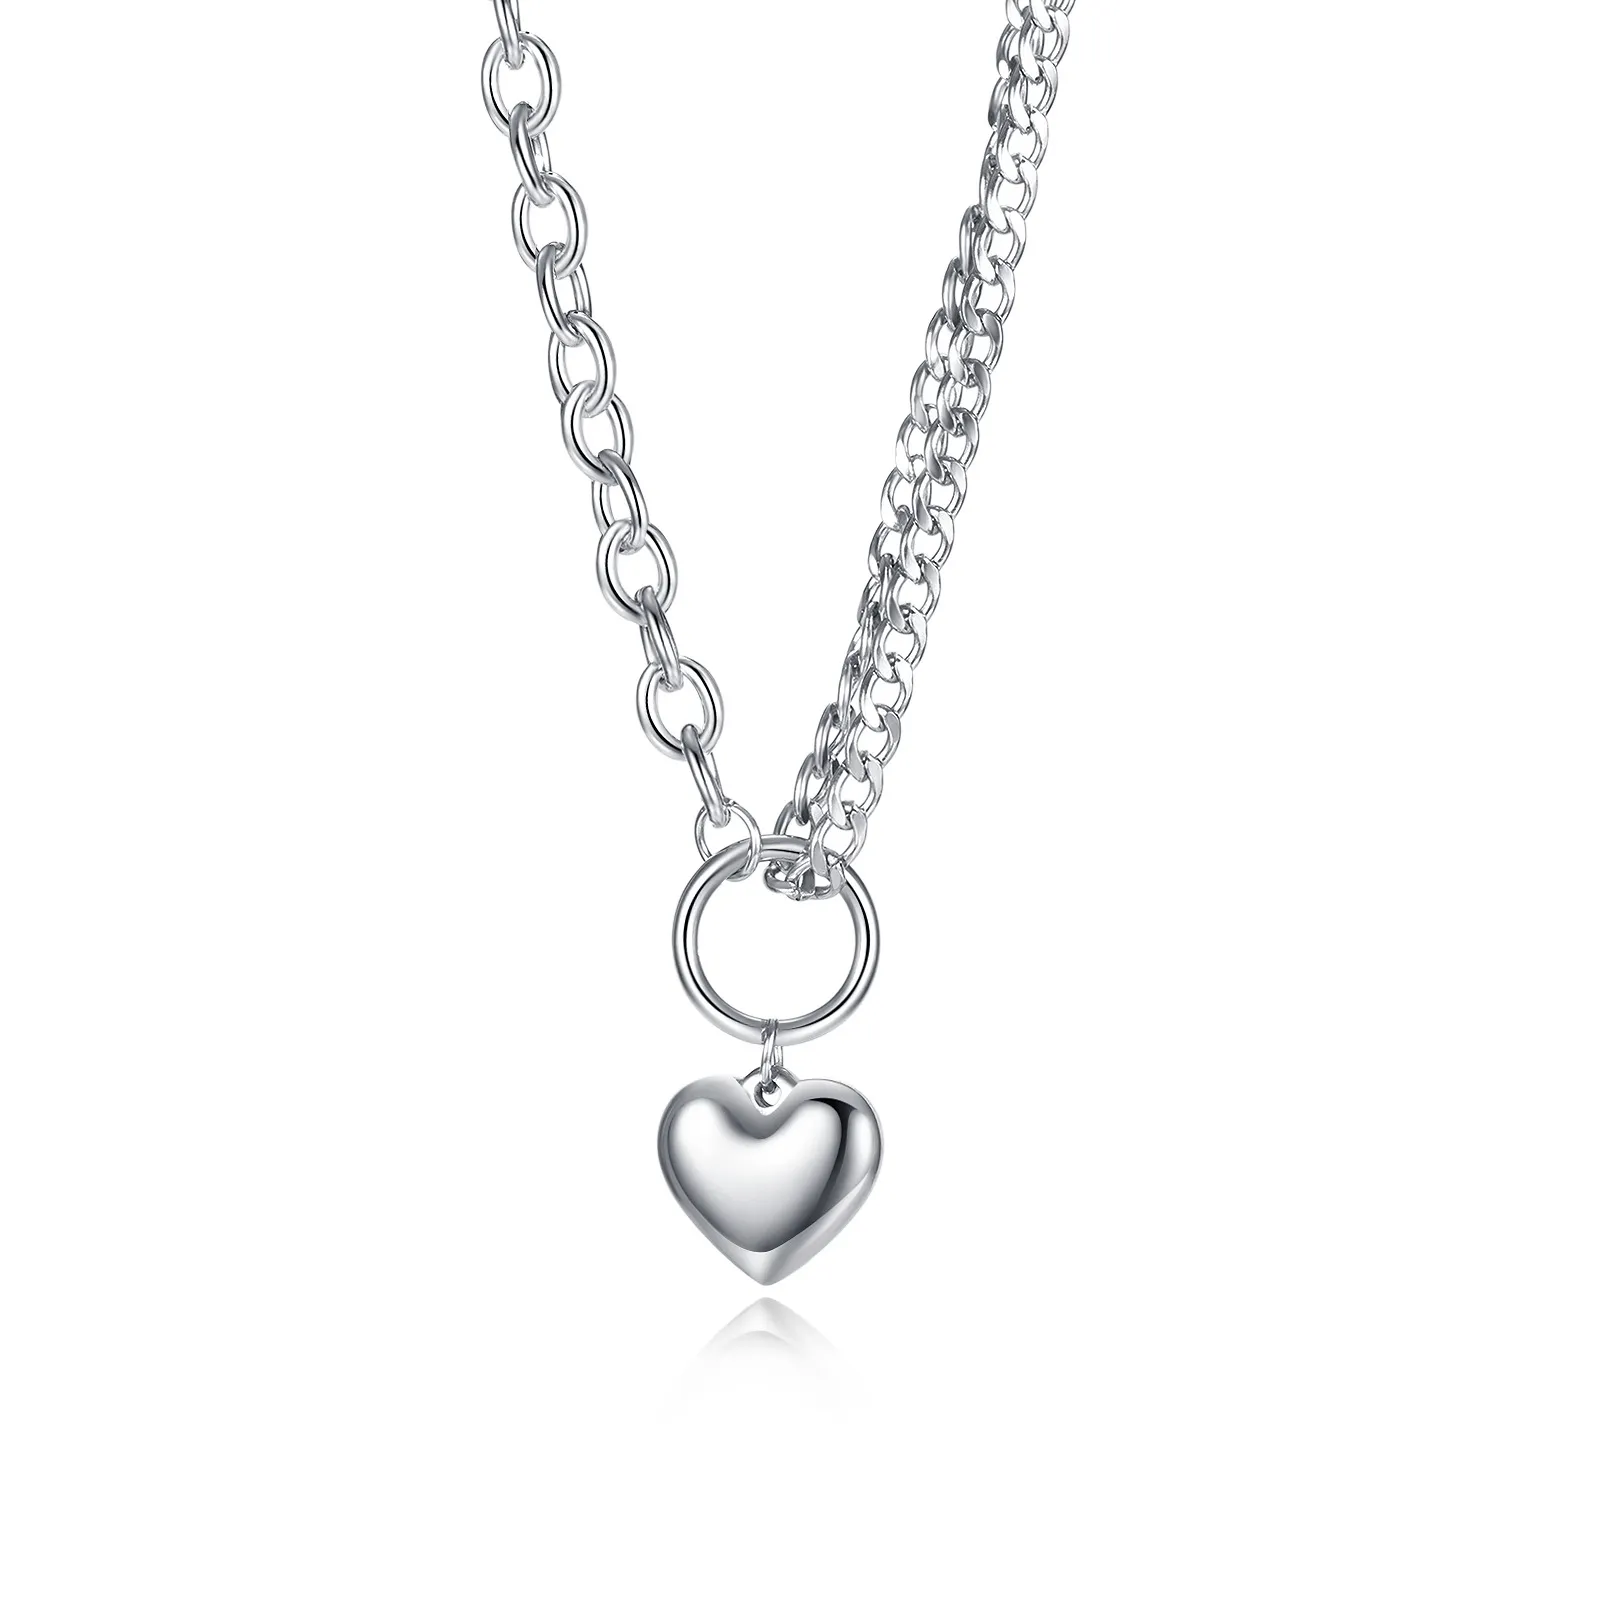 Silver Stainless Steel Multi-layer Heart Lover Charm Necklace Pendant Chain 18inch for Women Ladies Sweet Gifts